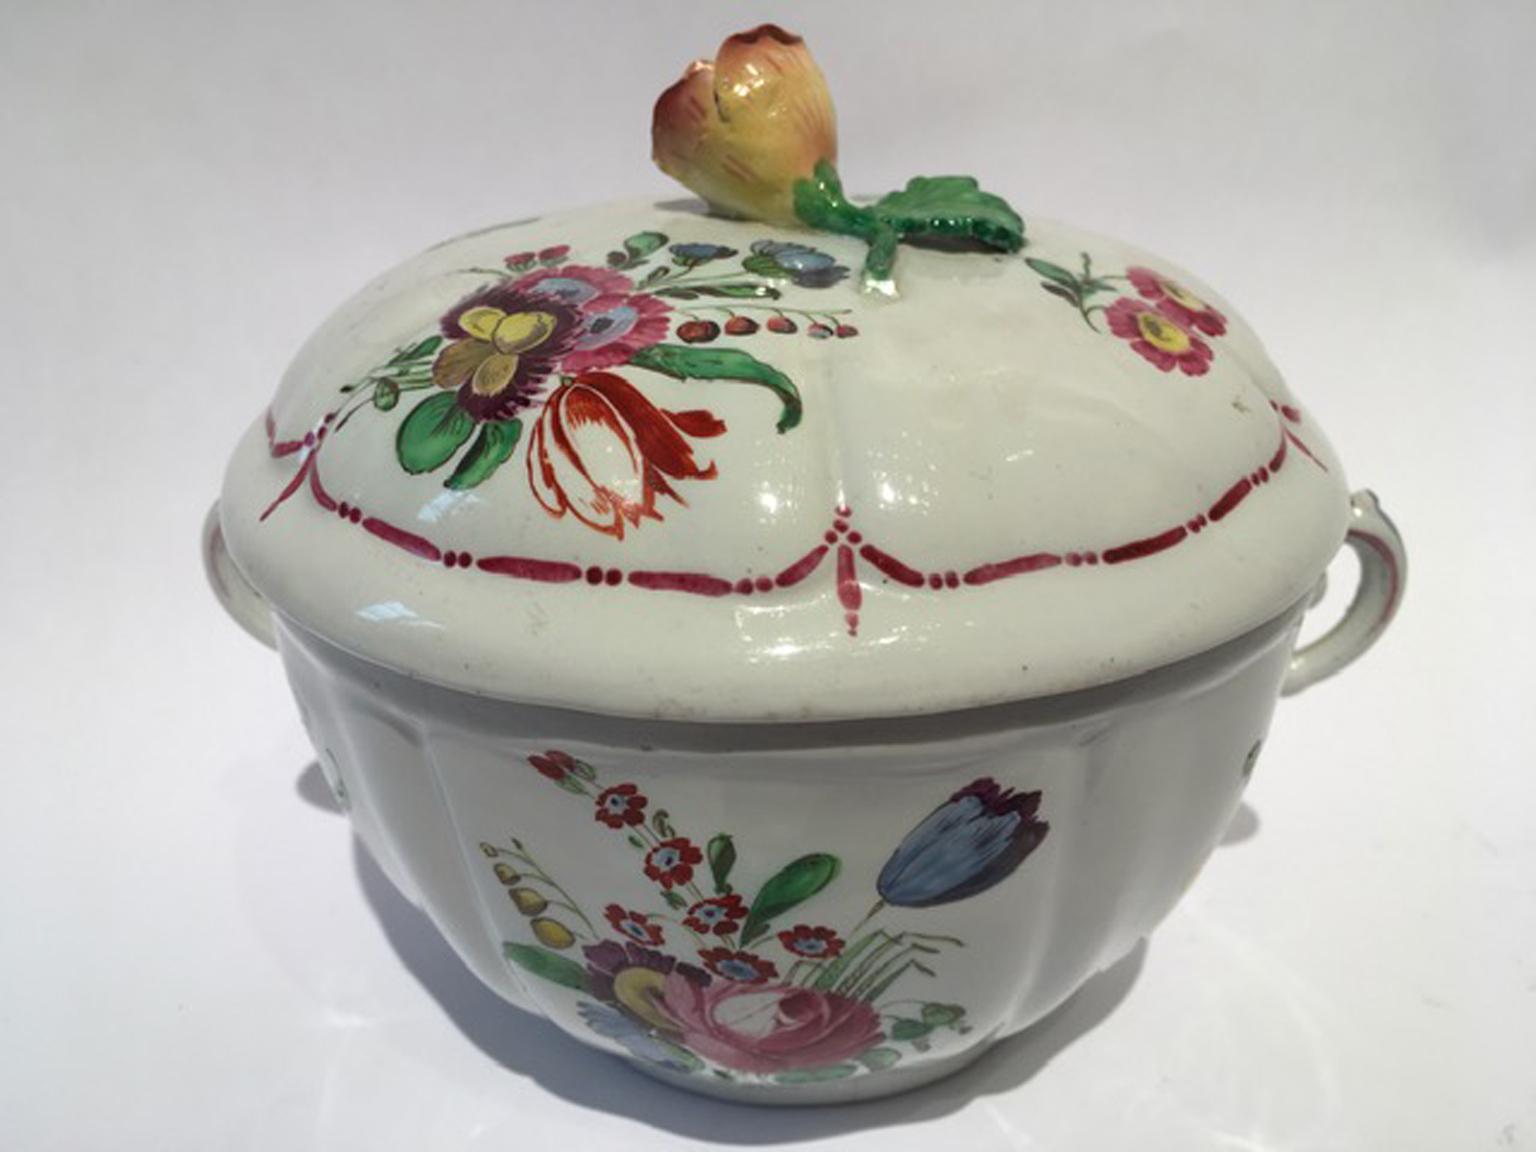 Italy 18th Century Richard Ginori Porcelain Covered Cup or Sugar Bowl For Sale 4